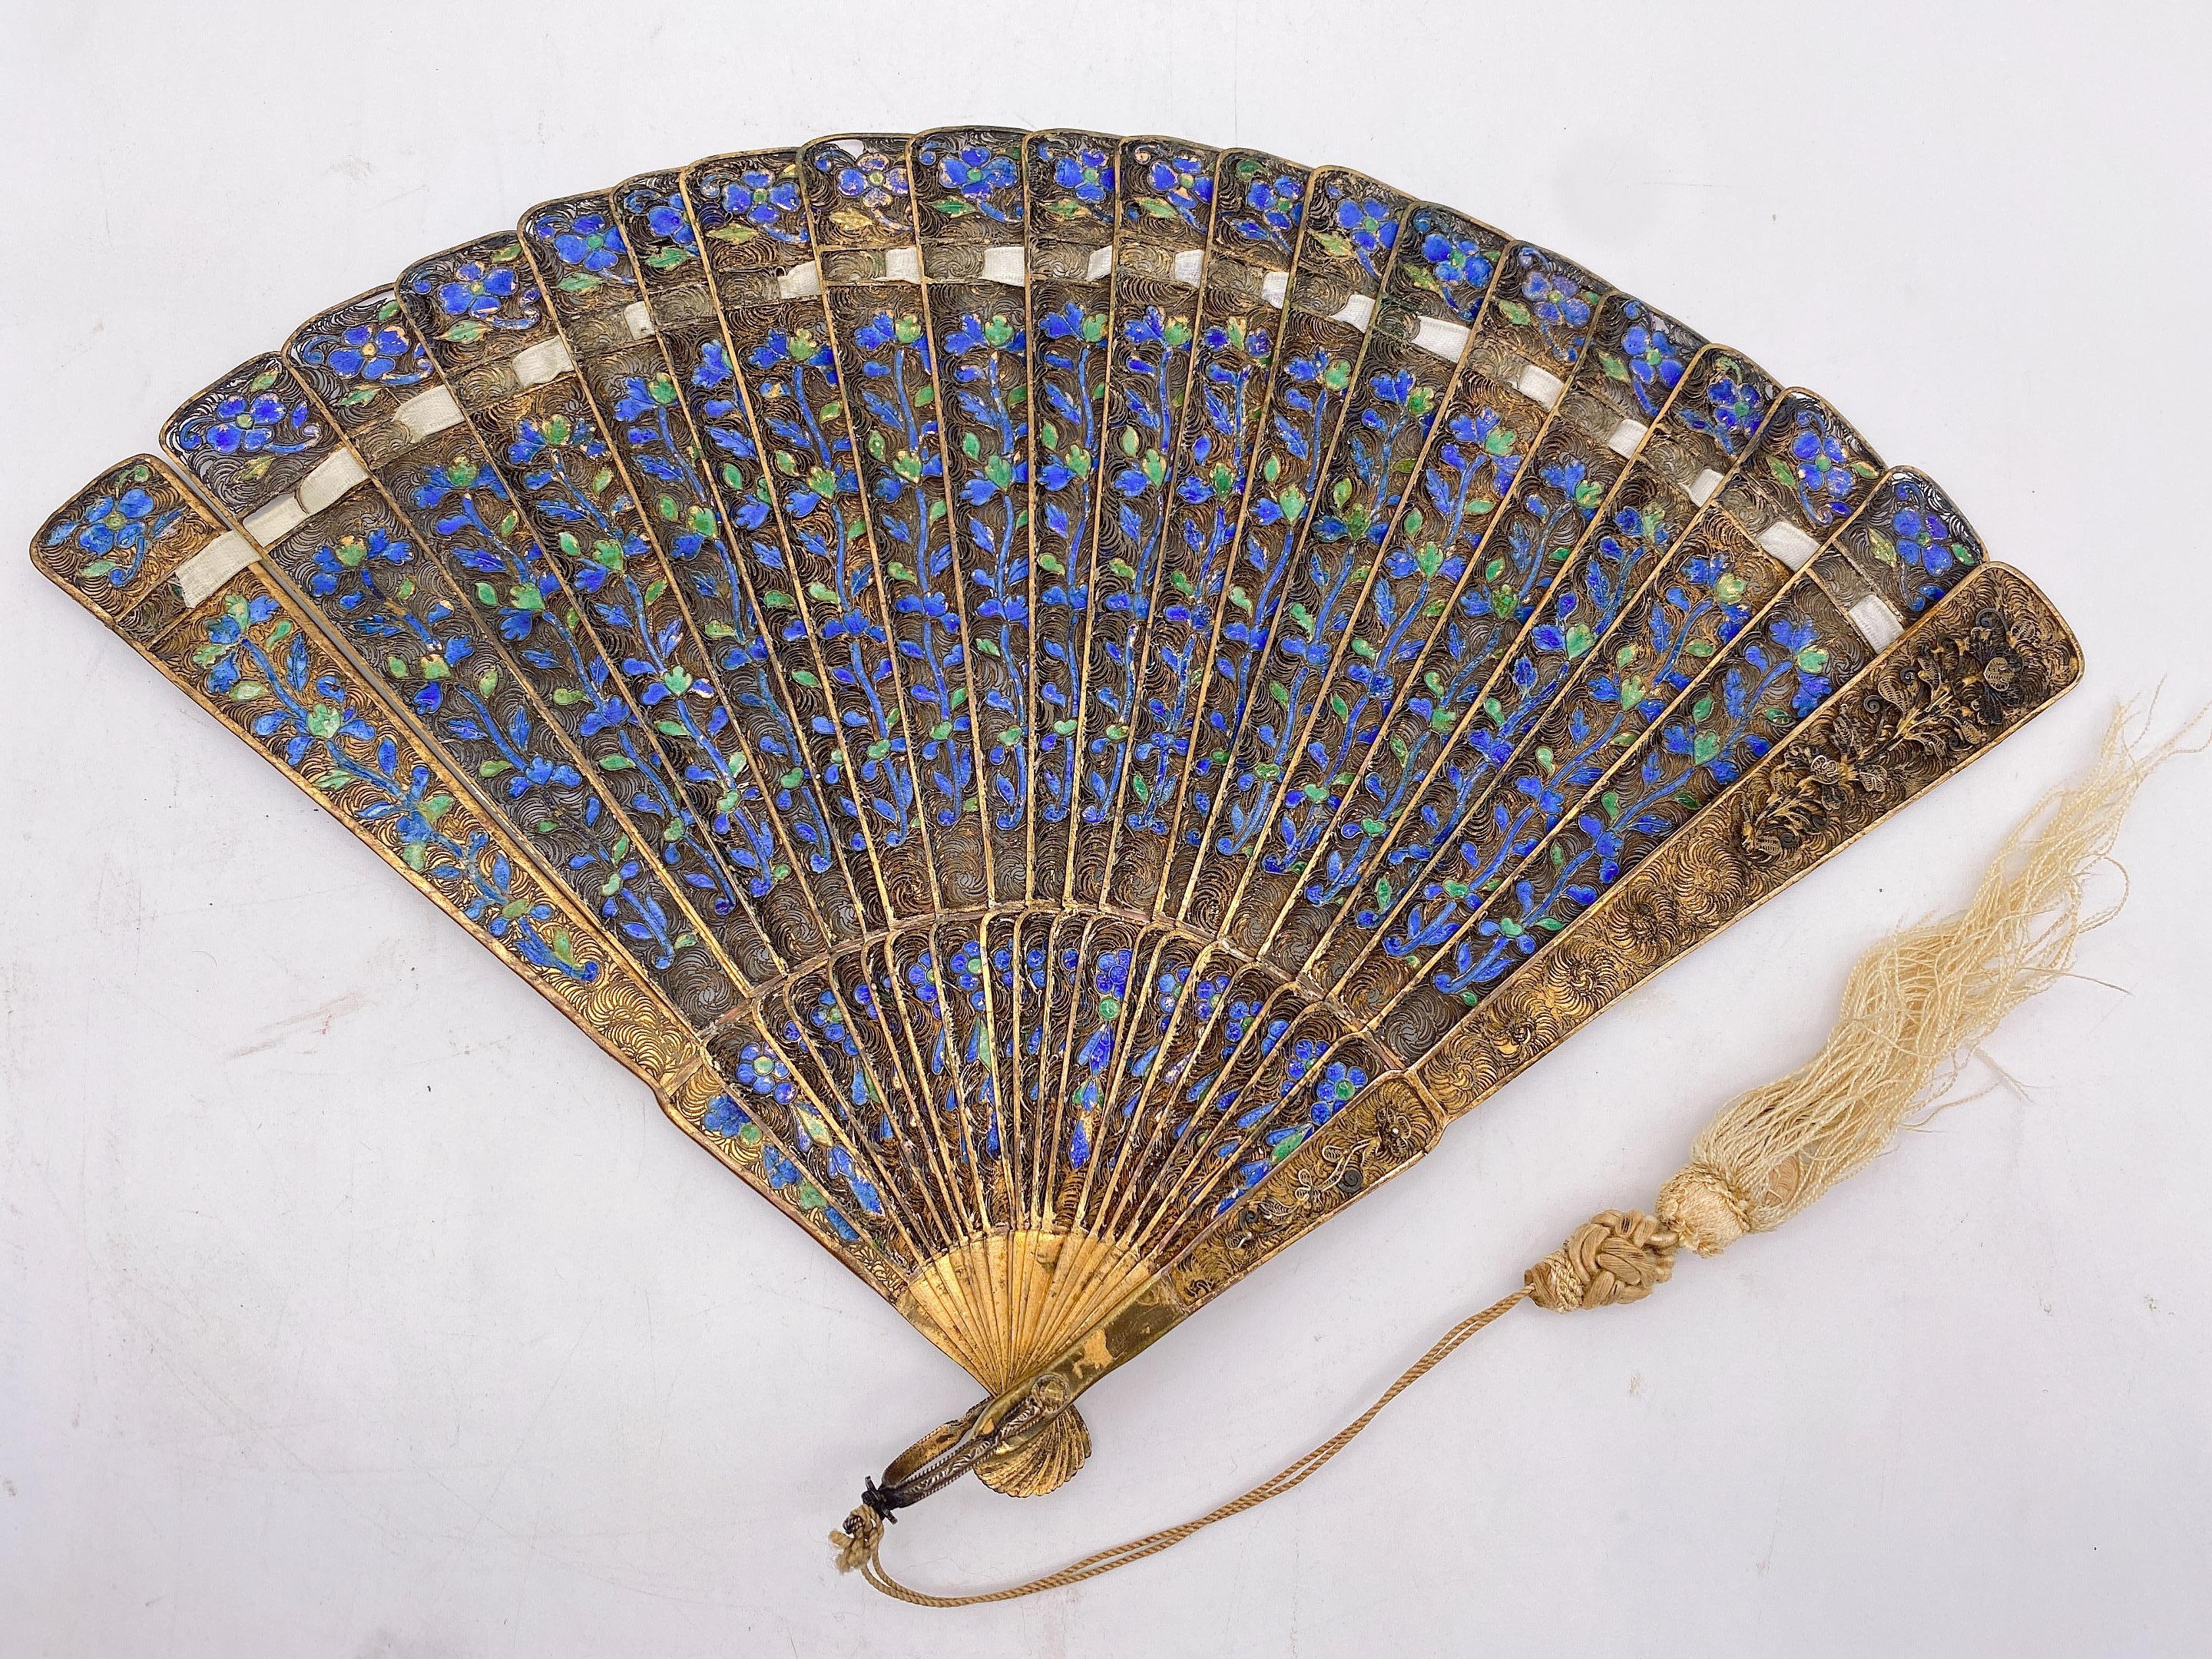 Unique rare fine antique 17th century Chinese gilt silver filigree and enamel brise fan, Qing dynasty, the fan has 20 sticks with a 24k gold ring loop, wonderful sticks with silver wire filigree and enamel blue and green in both sides, incredible